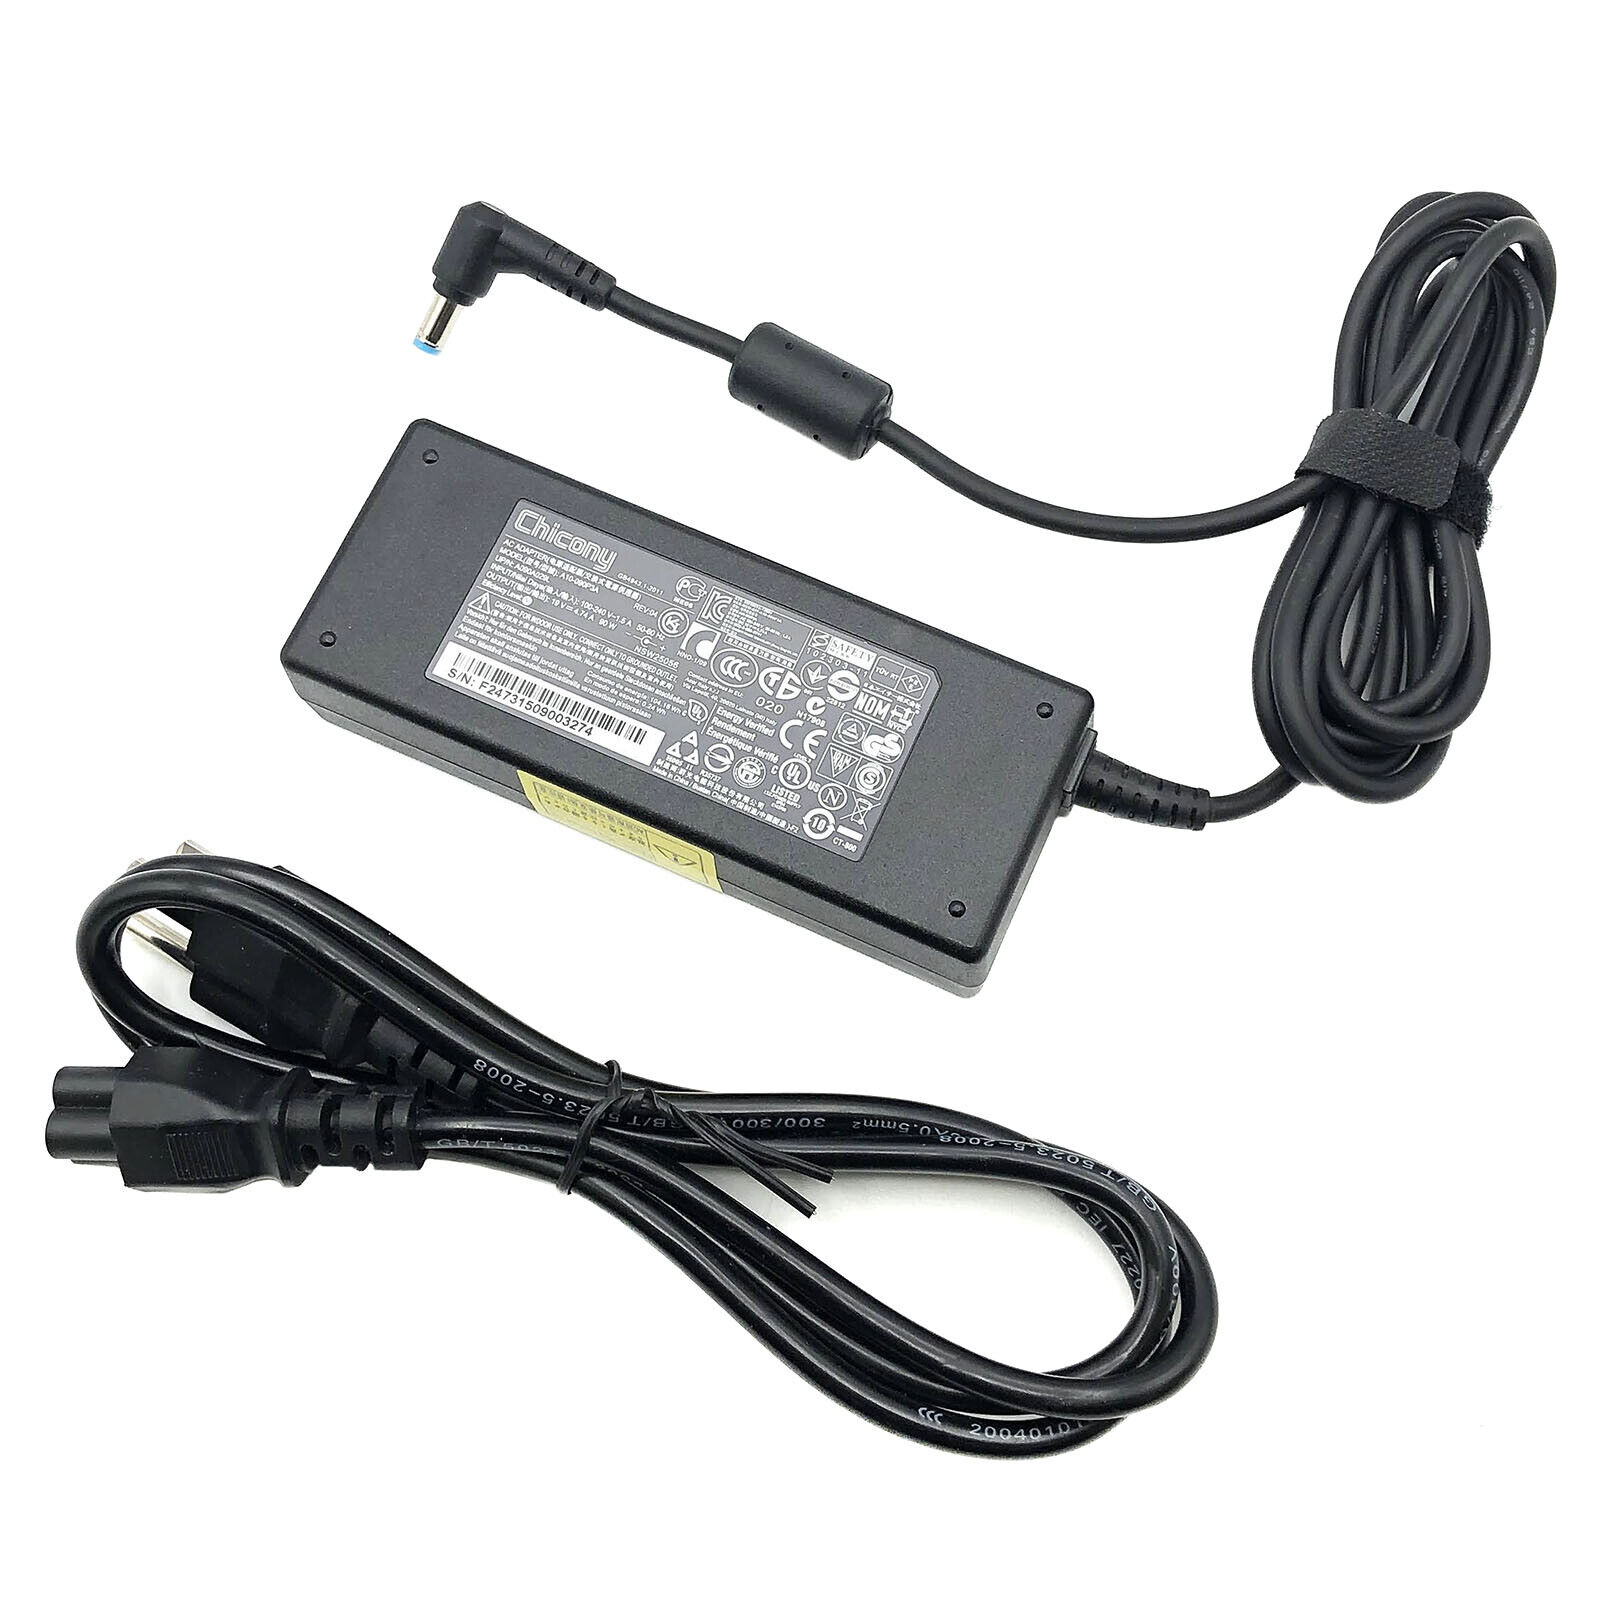 Genuine Acer Aspire U5-710 XC-704 XC-704G AC Adapter Charger & Power Cord 90W